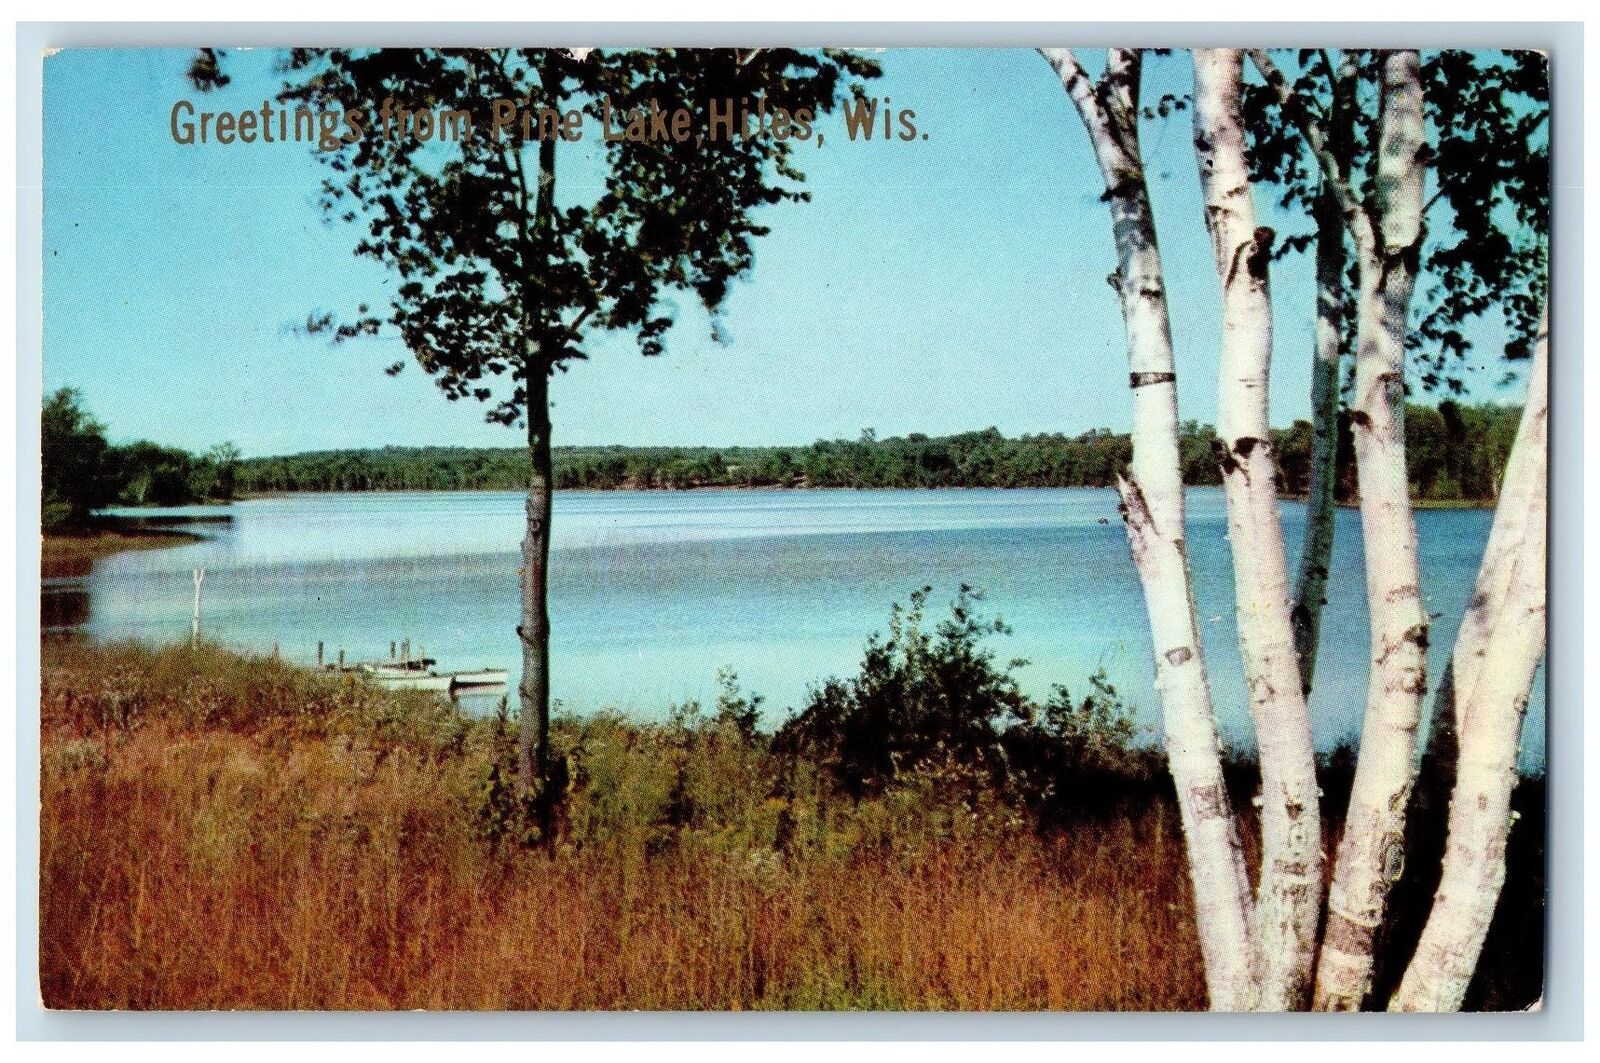 Hiles Wisconsin WI Postcard Greetings From Pine Lake Trees Scene c1960s Vintage